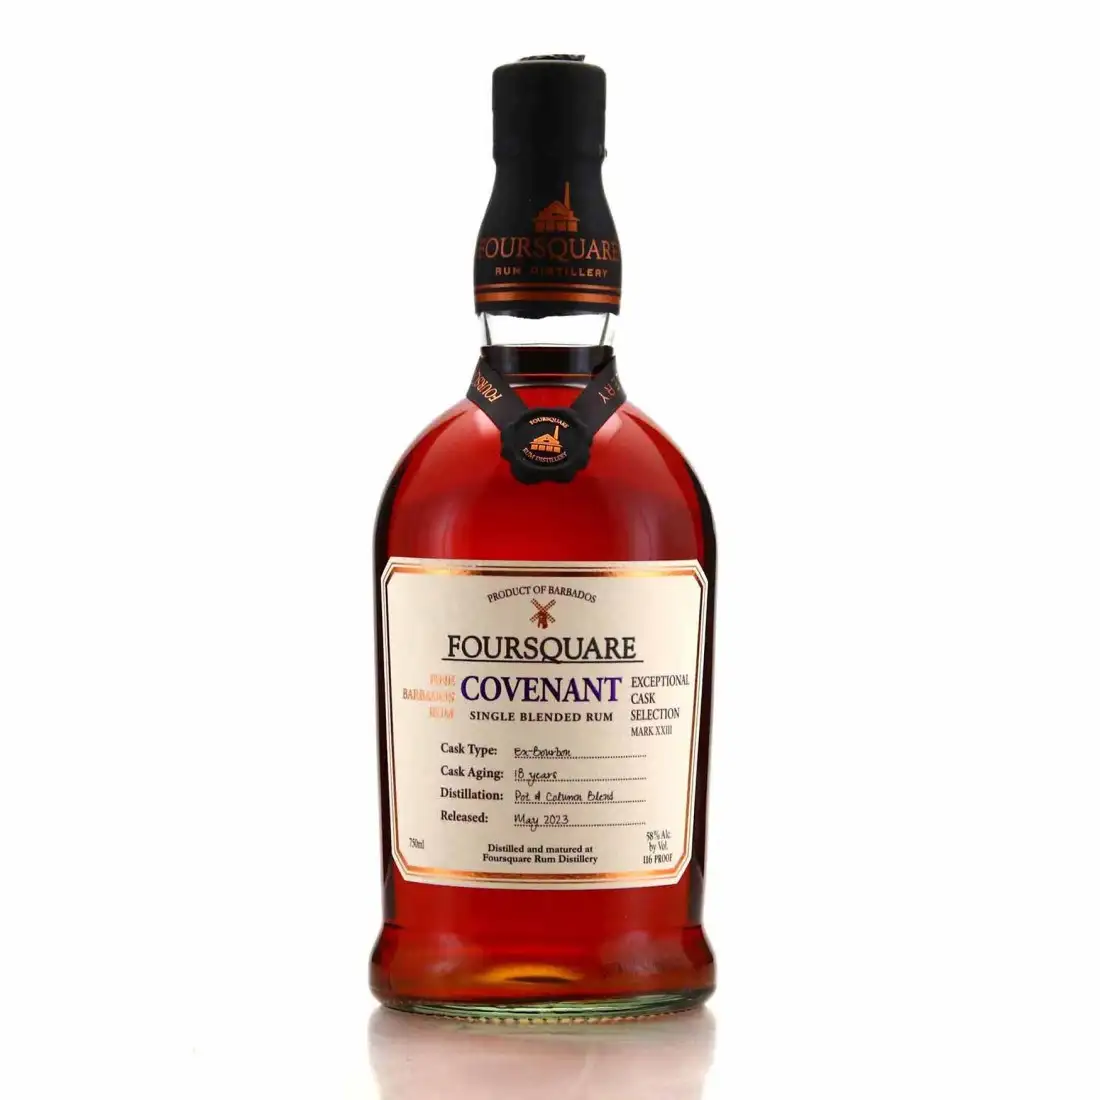 Image of the front of the bottle of the rum Exceptional Cask Selection XXIII Covenant